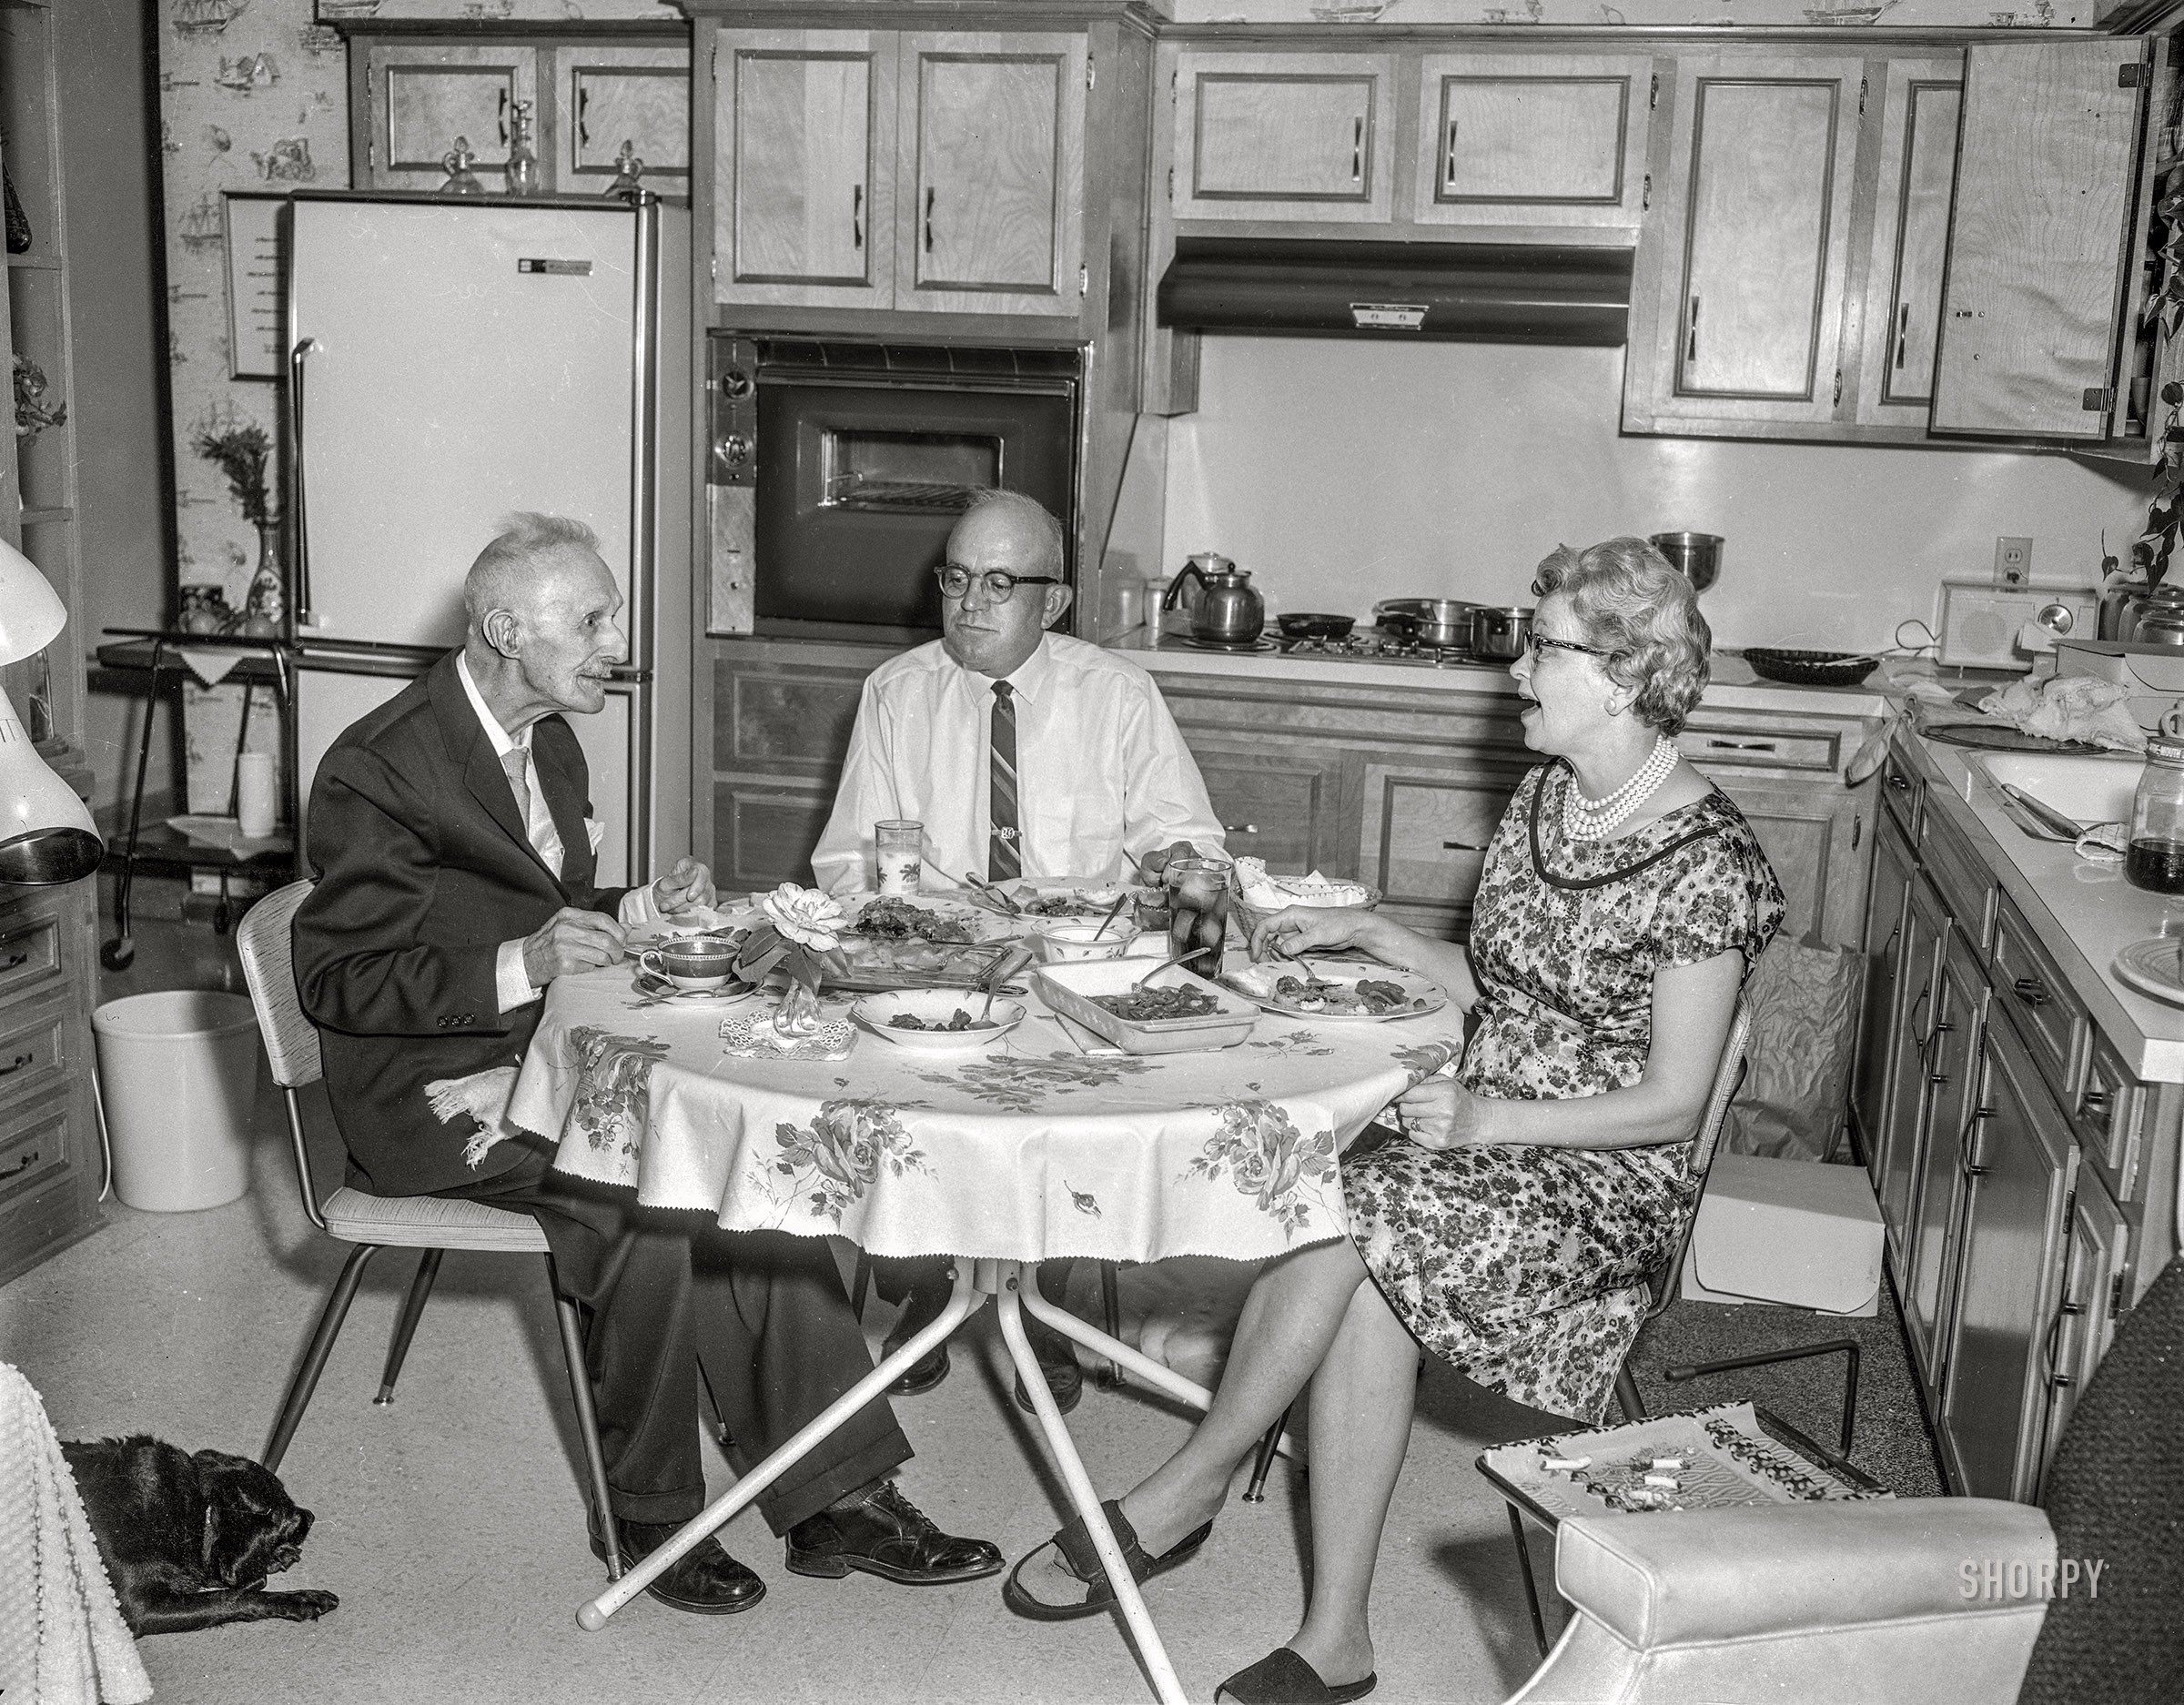 From sometime around 1968 comes this News Archive snapshot of a cozy kitchen dinner. Raise your hand if you see family here. 4x5 inch acetate negative. View full size.